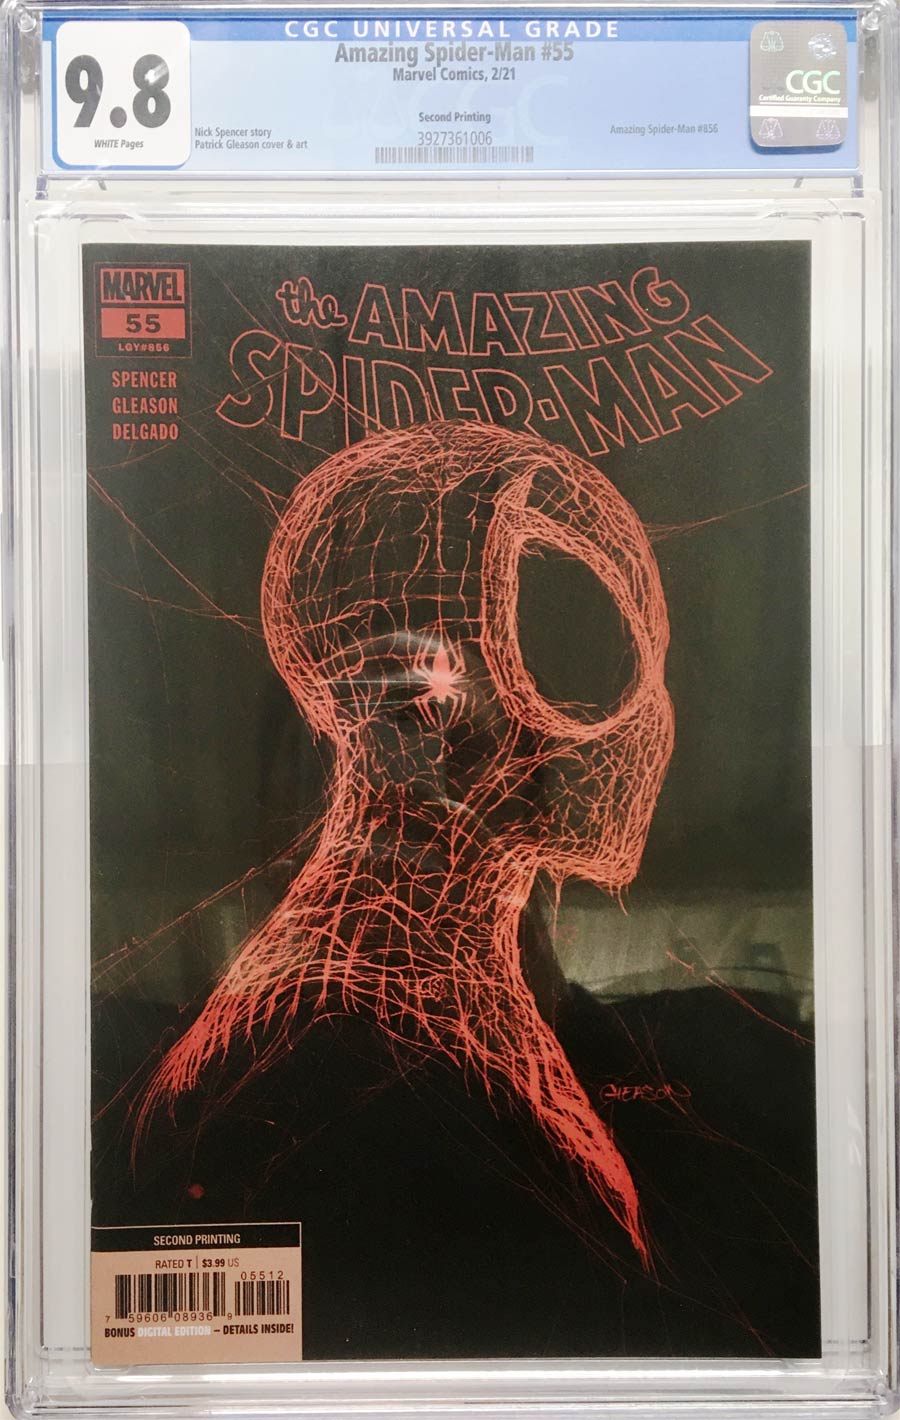 Amazing Spider-Man Vol 5 #55 Cover H 2nd Ptg Patrick Gleason Webhead Red On Black Variant Cover CGC 9.8